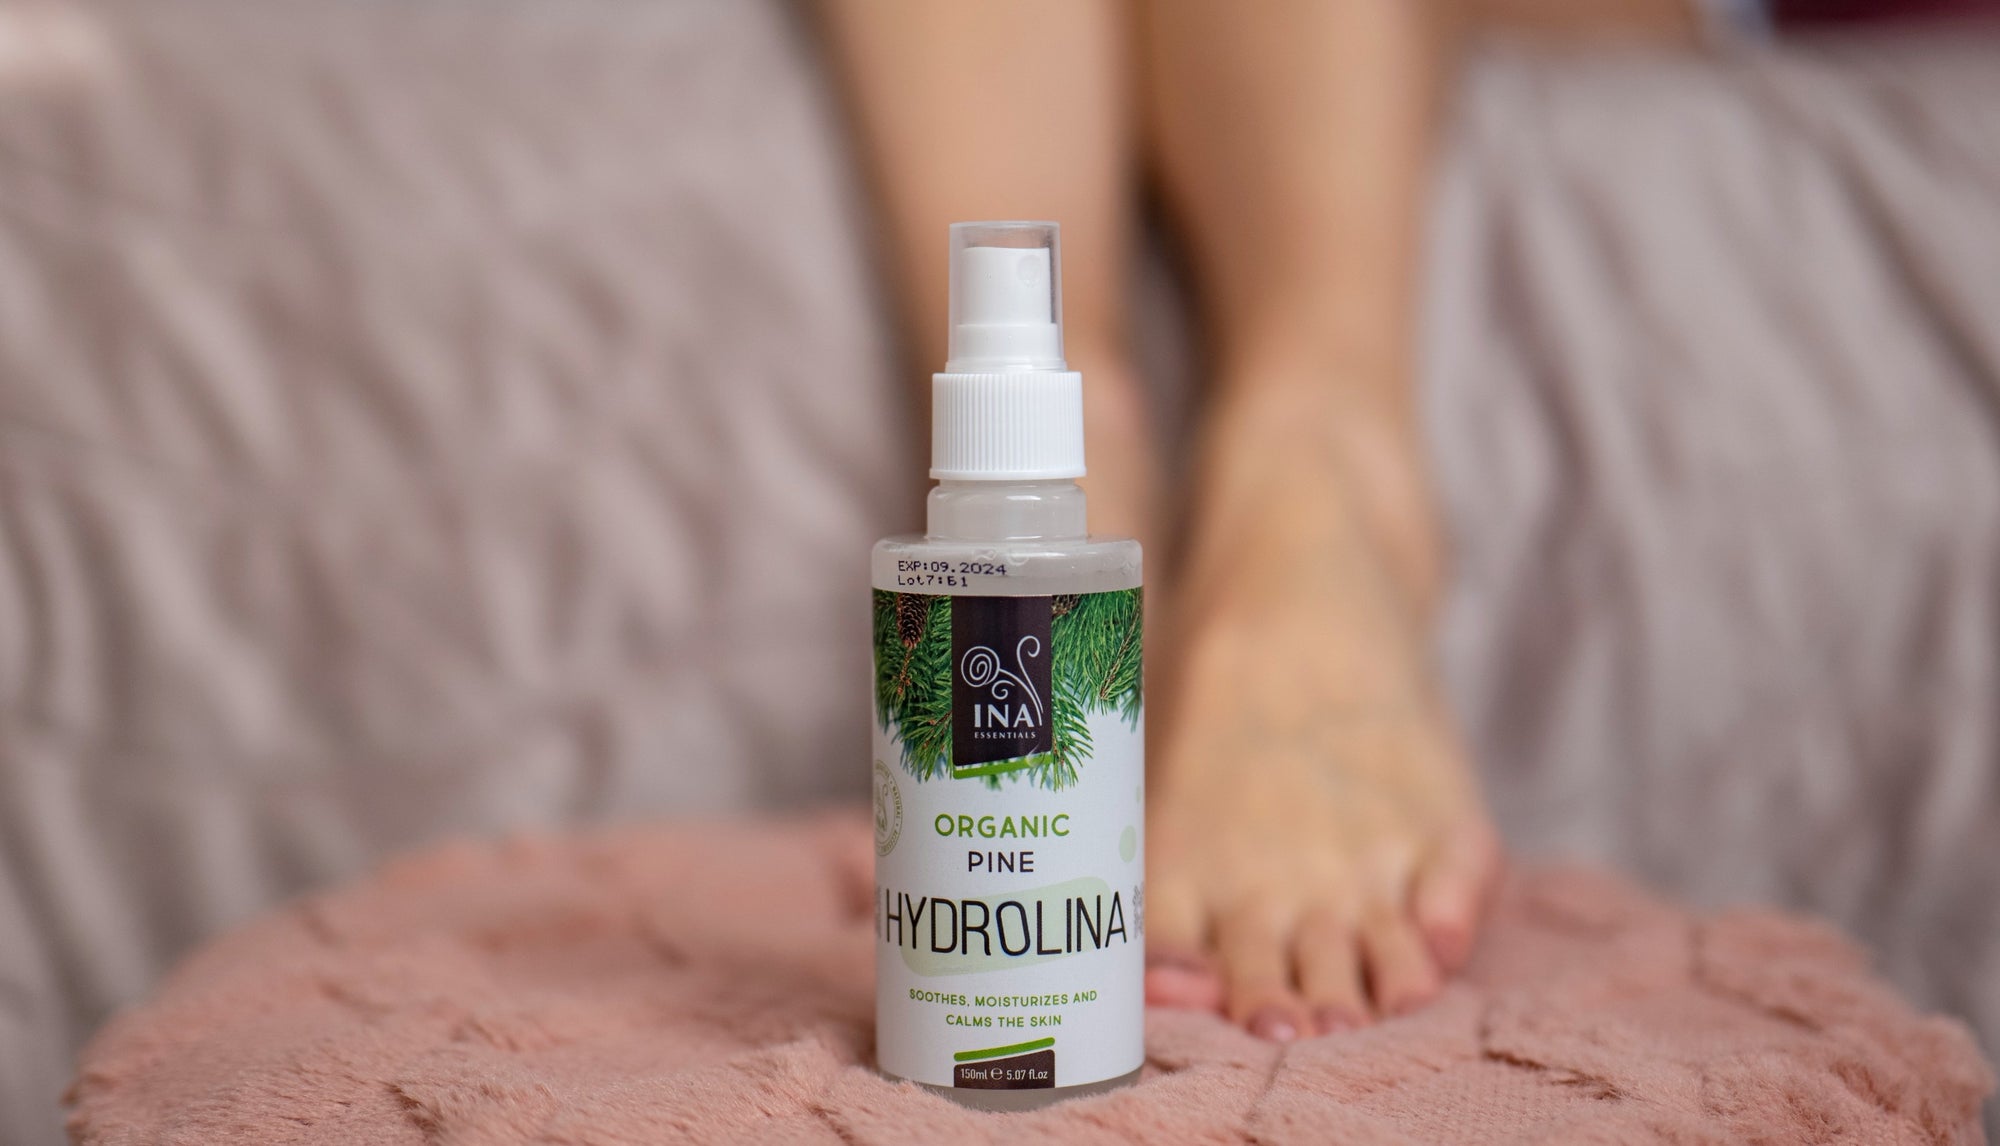 The Solution to Nail Fungus and Smelly Feet: Organic White Pine Hydrolina